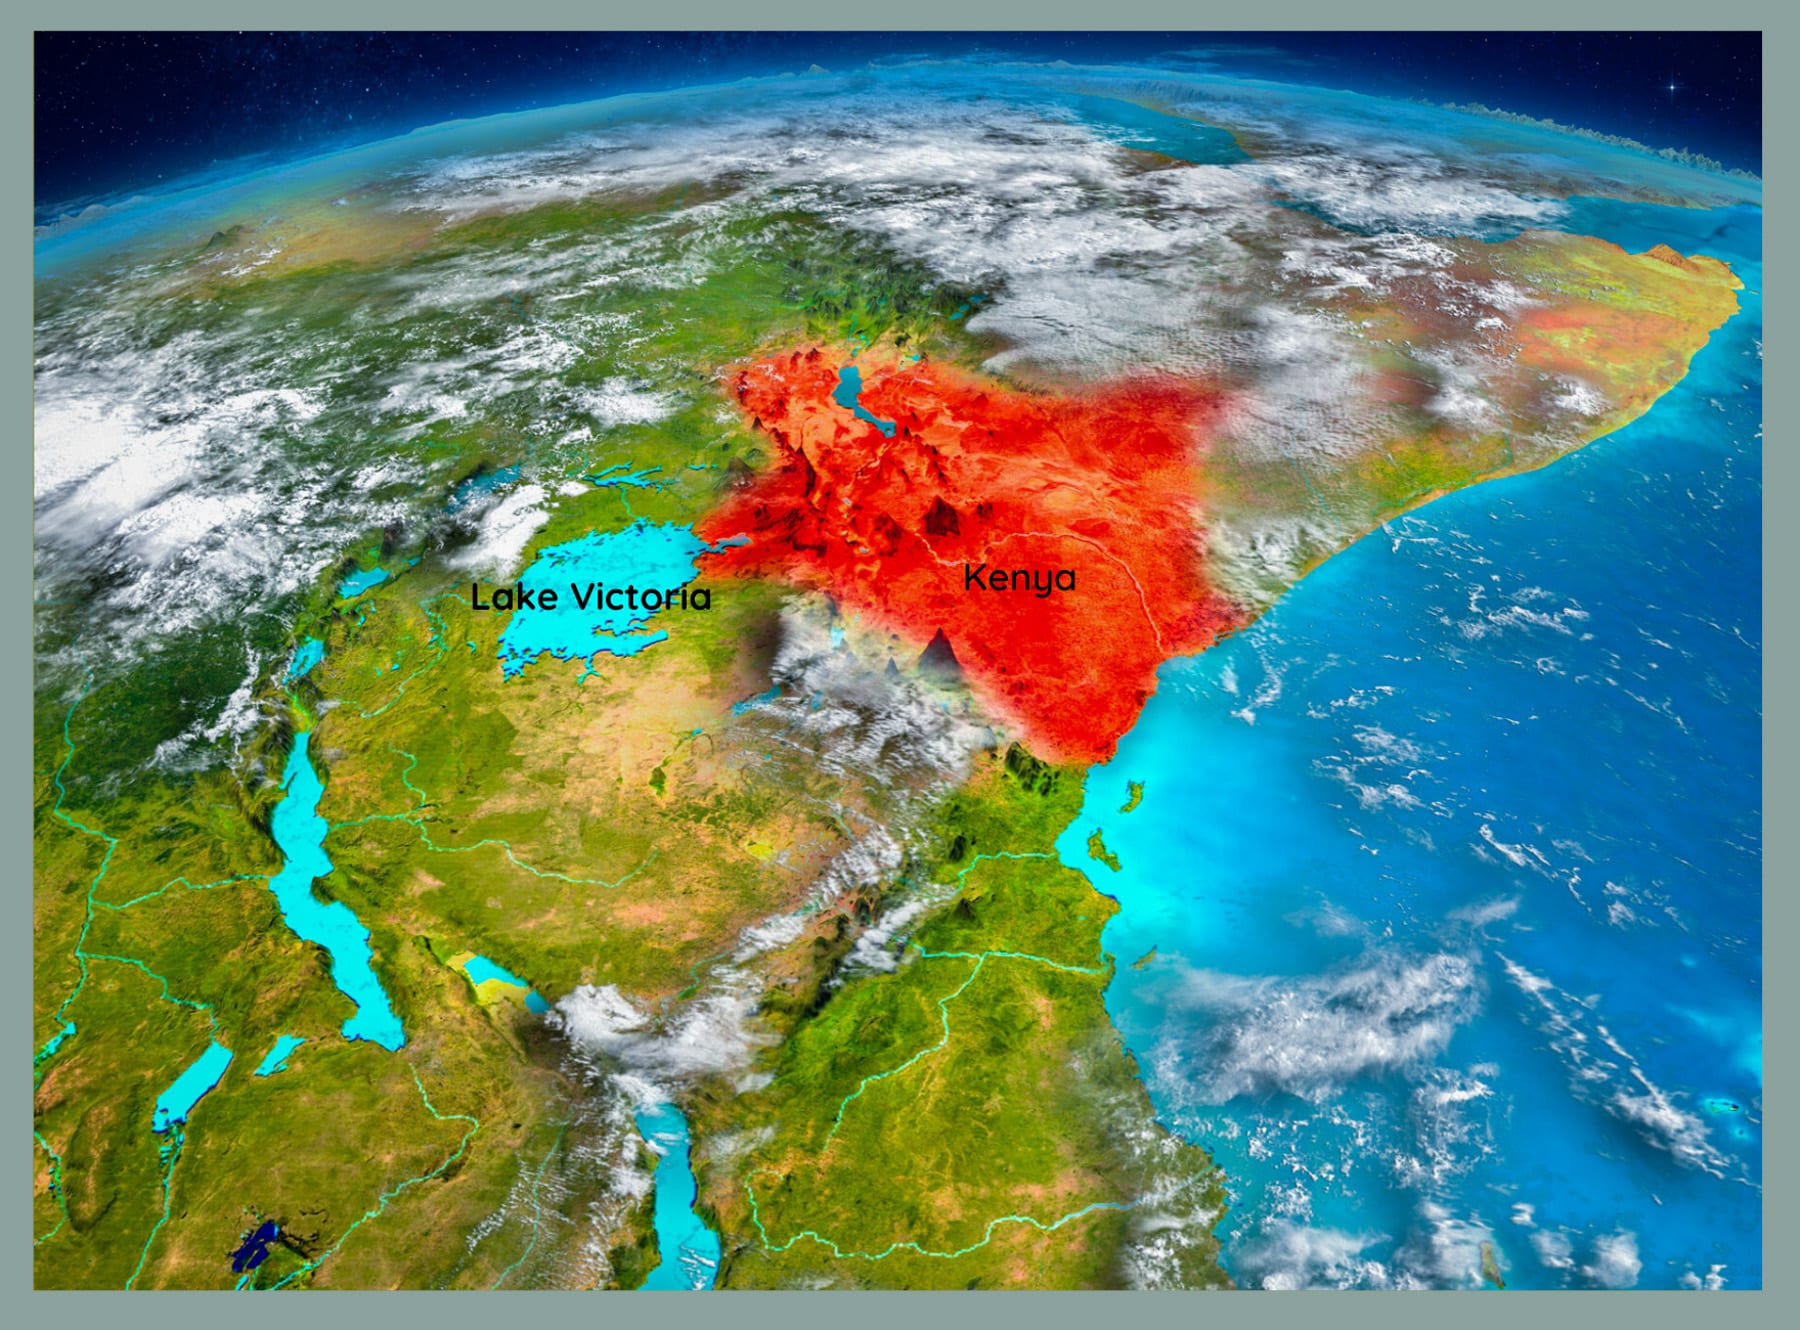 The size of Lake Victoria can be appreciated by viewing it from space.